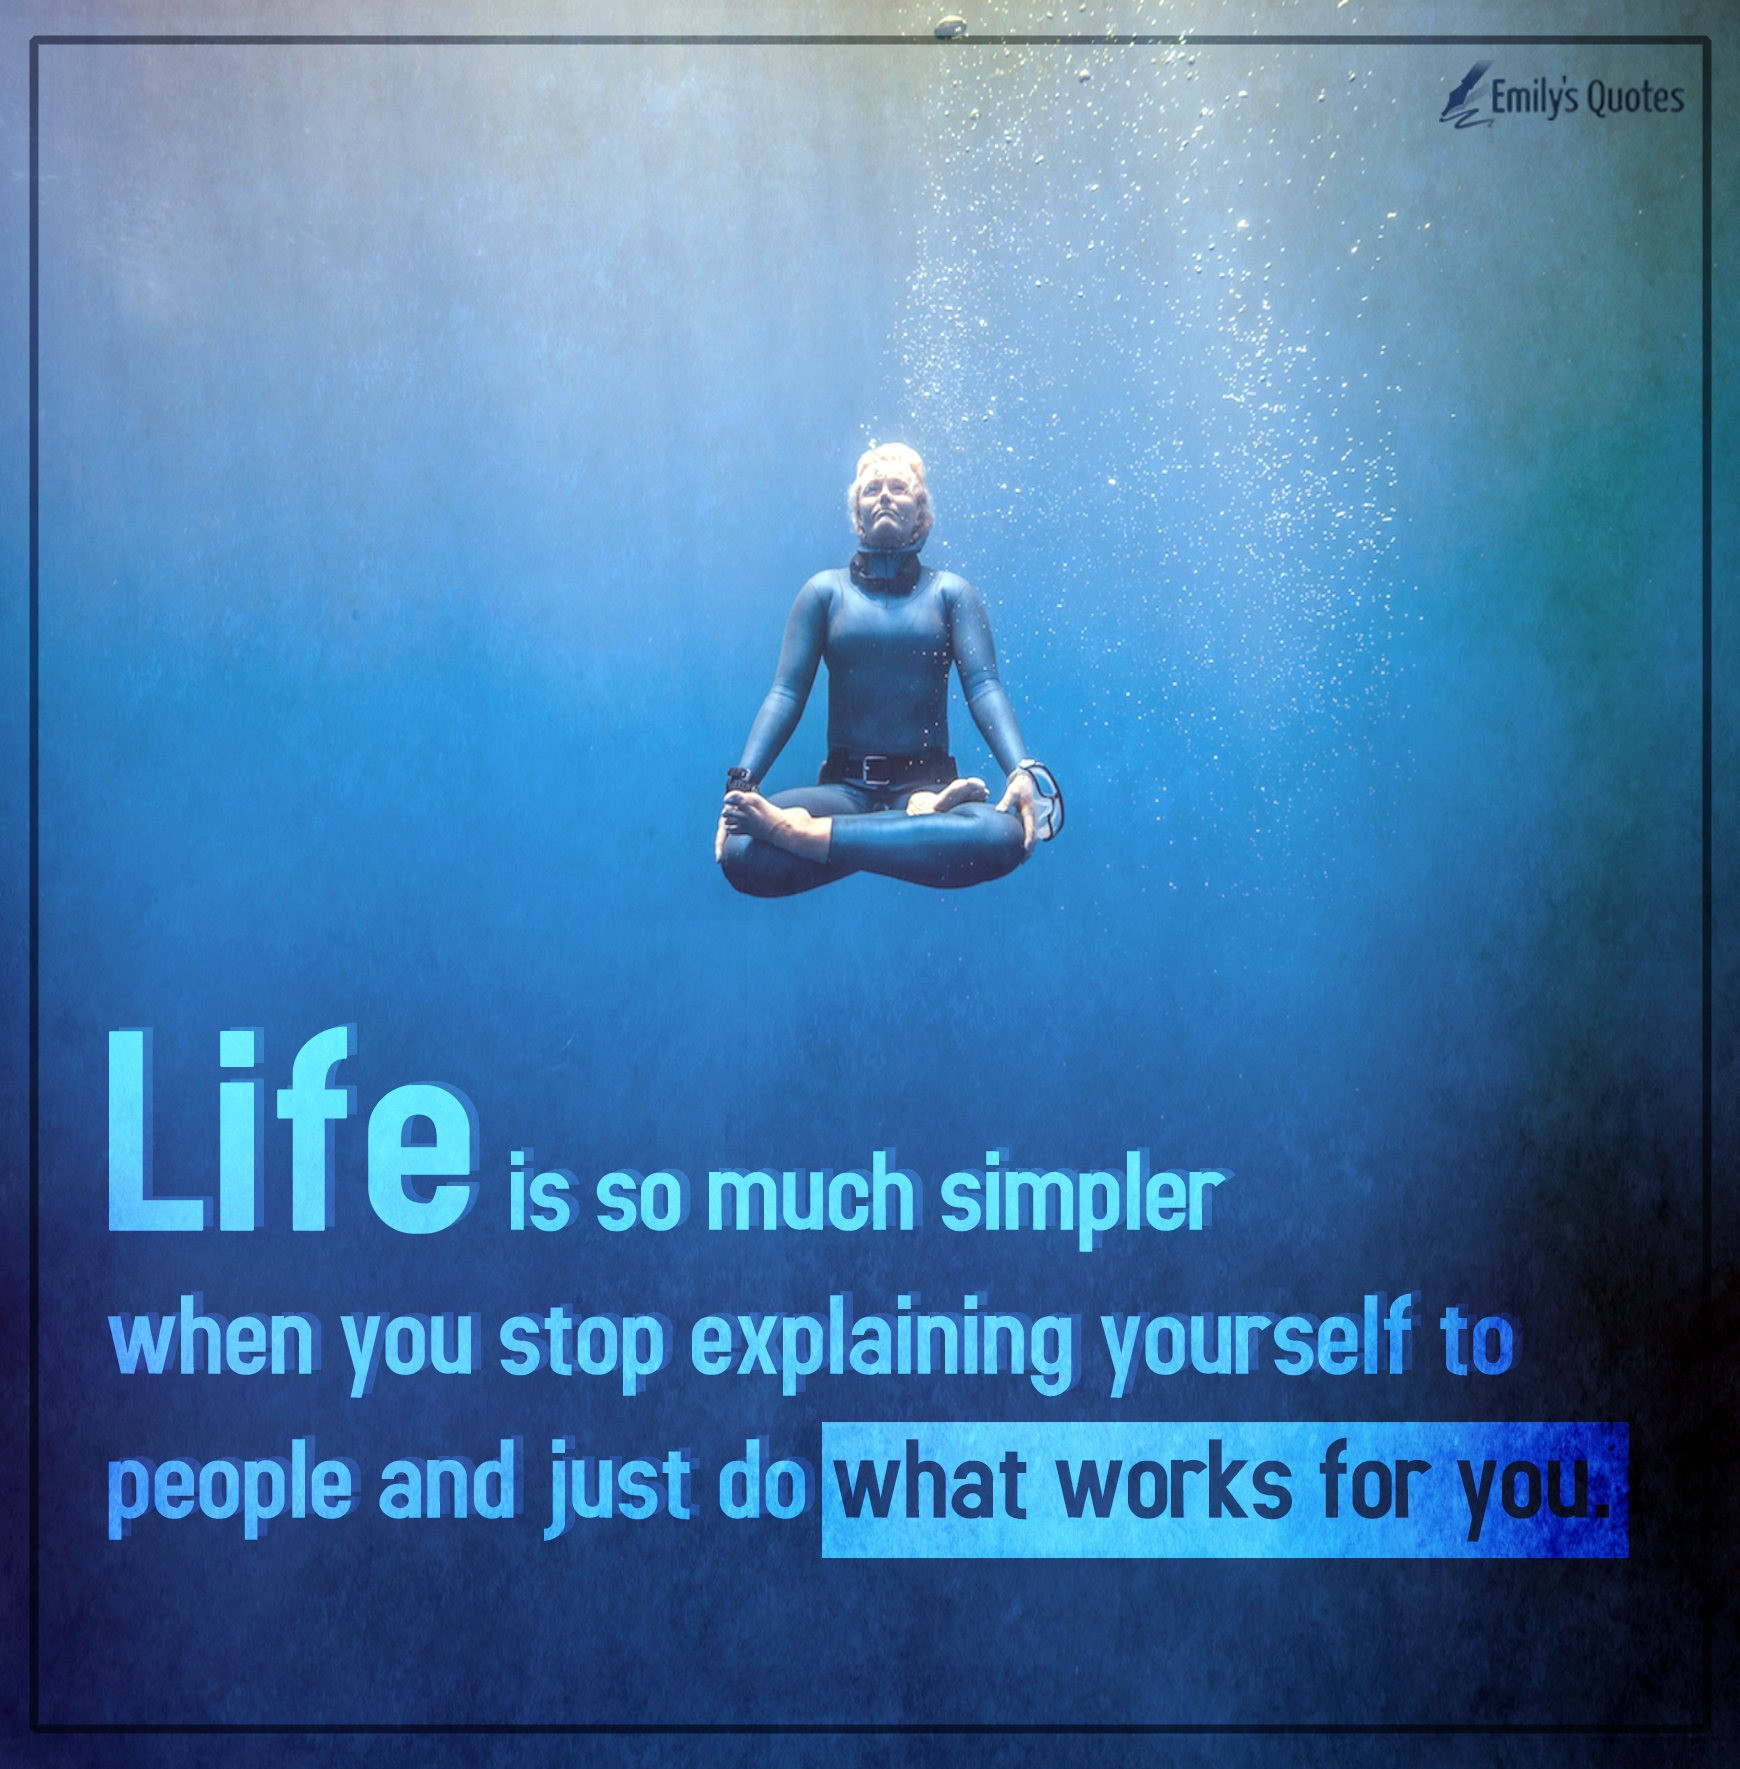 Life is so much simpler when you stop explaining yourself to people and just do what works for you